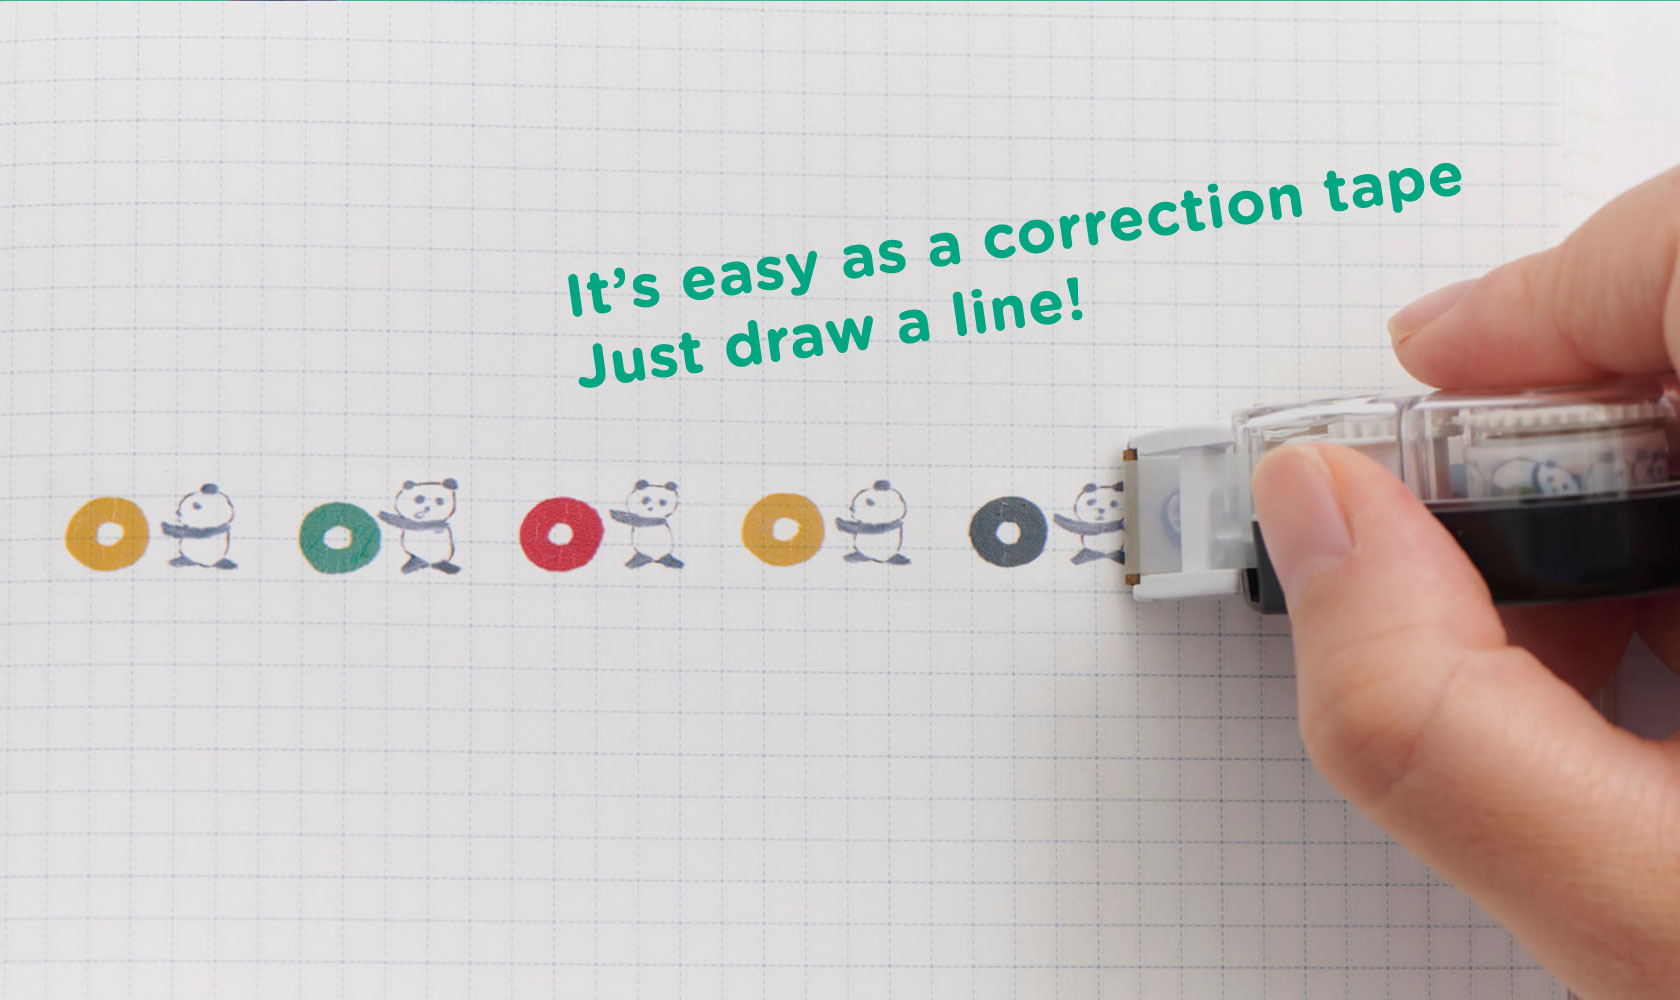 It’s easy as a correction tape
                    Just draw a line!